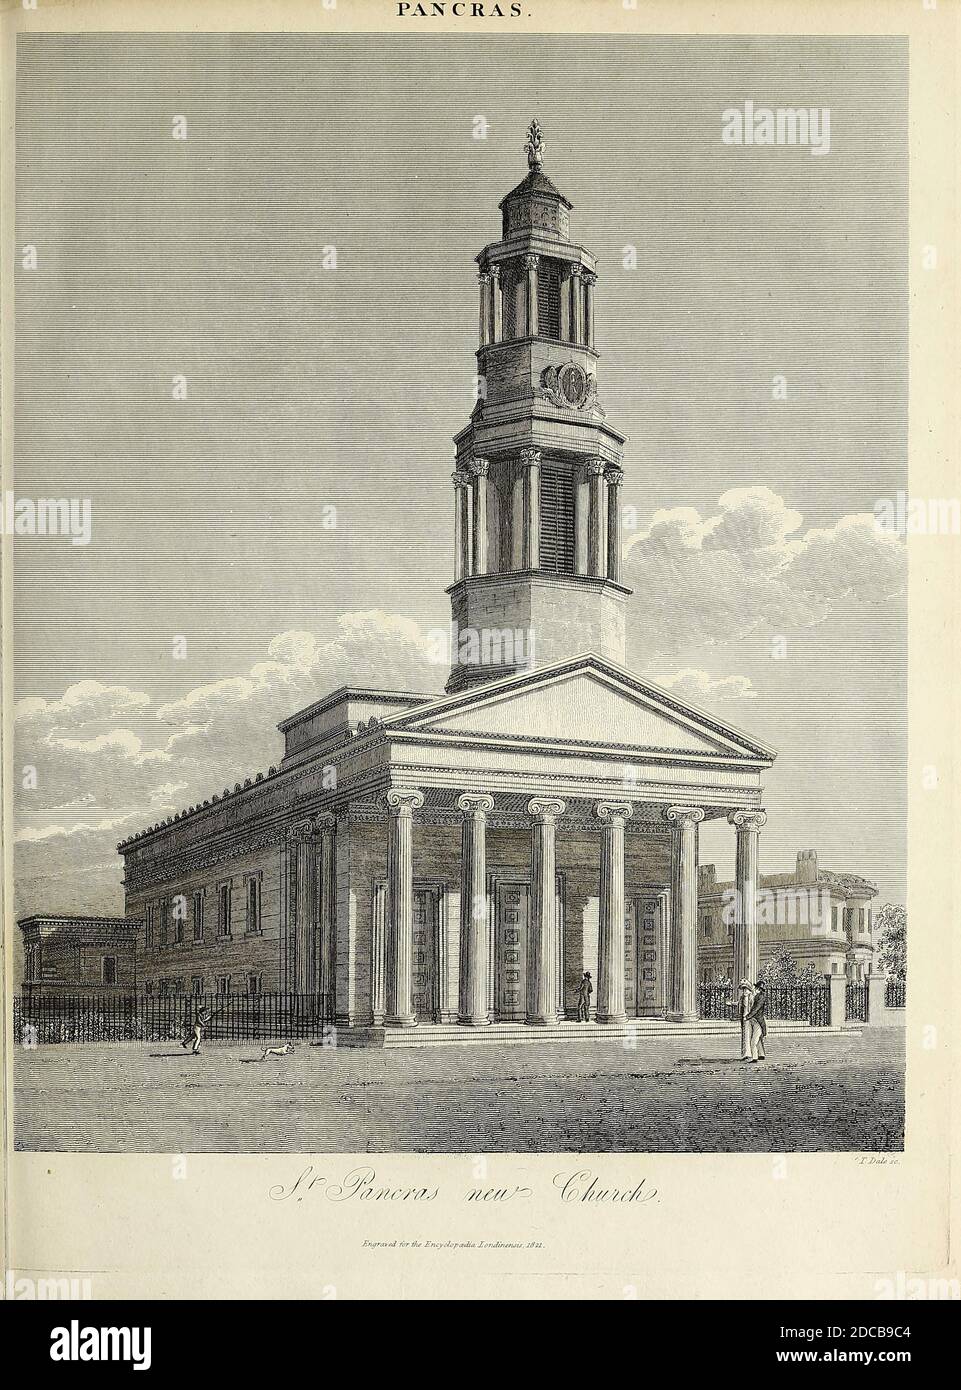 19th century illustration of St. Pancras New Church, London Copperplate engraving From the Encyclopaedia Londinensis or, Universal dictionary of arts, sciences, and literature; Volume XVIII;  Edited by Wilkes, John. Published in London in 1821 Stock Photo